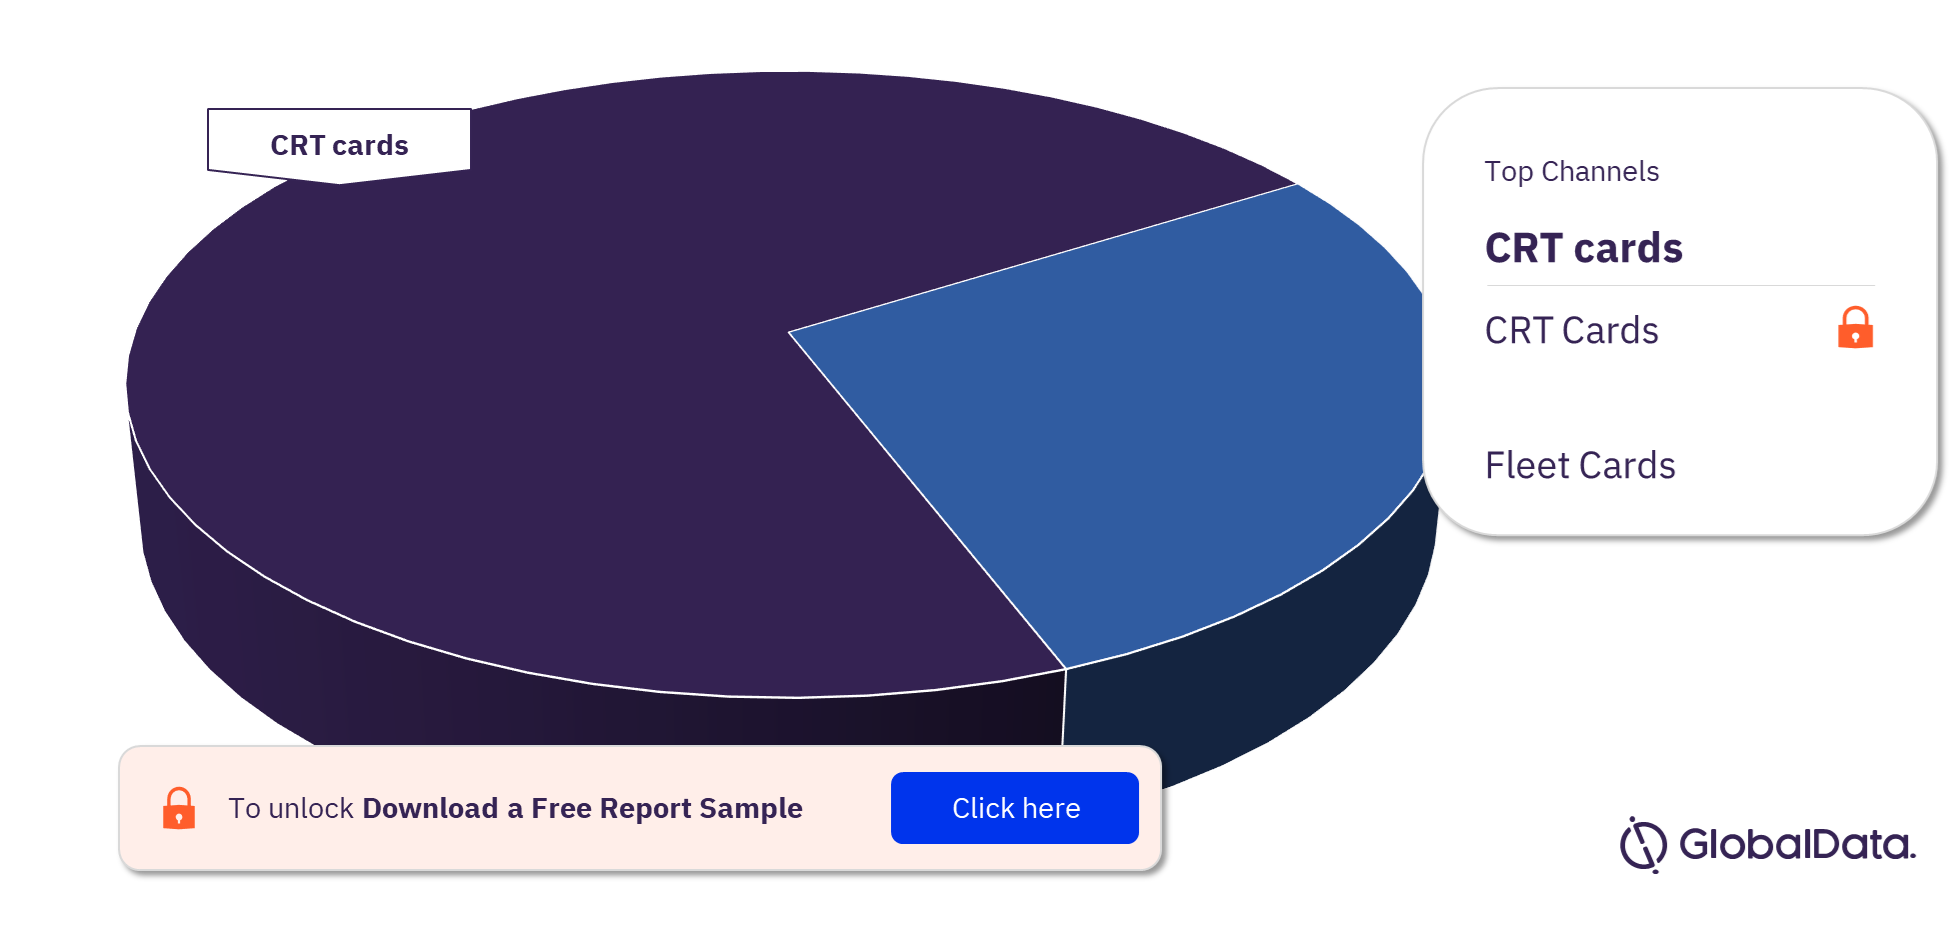 Spain Fuel Cards Market Analysis by Channels, 2022 (%)